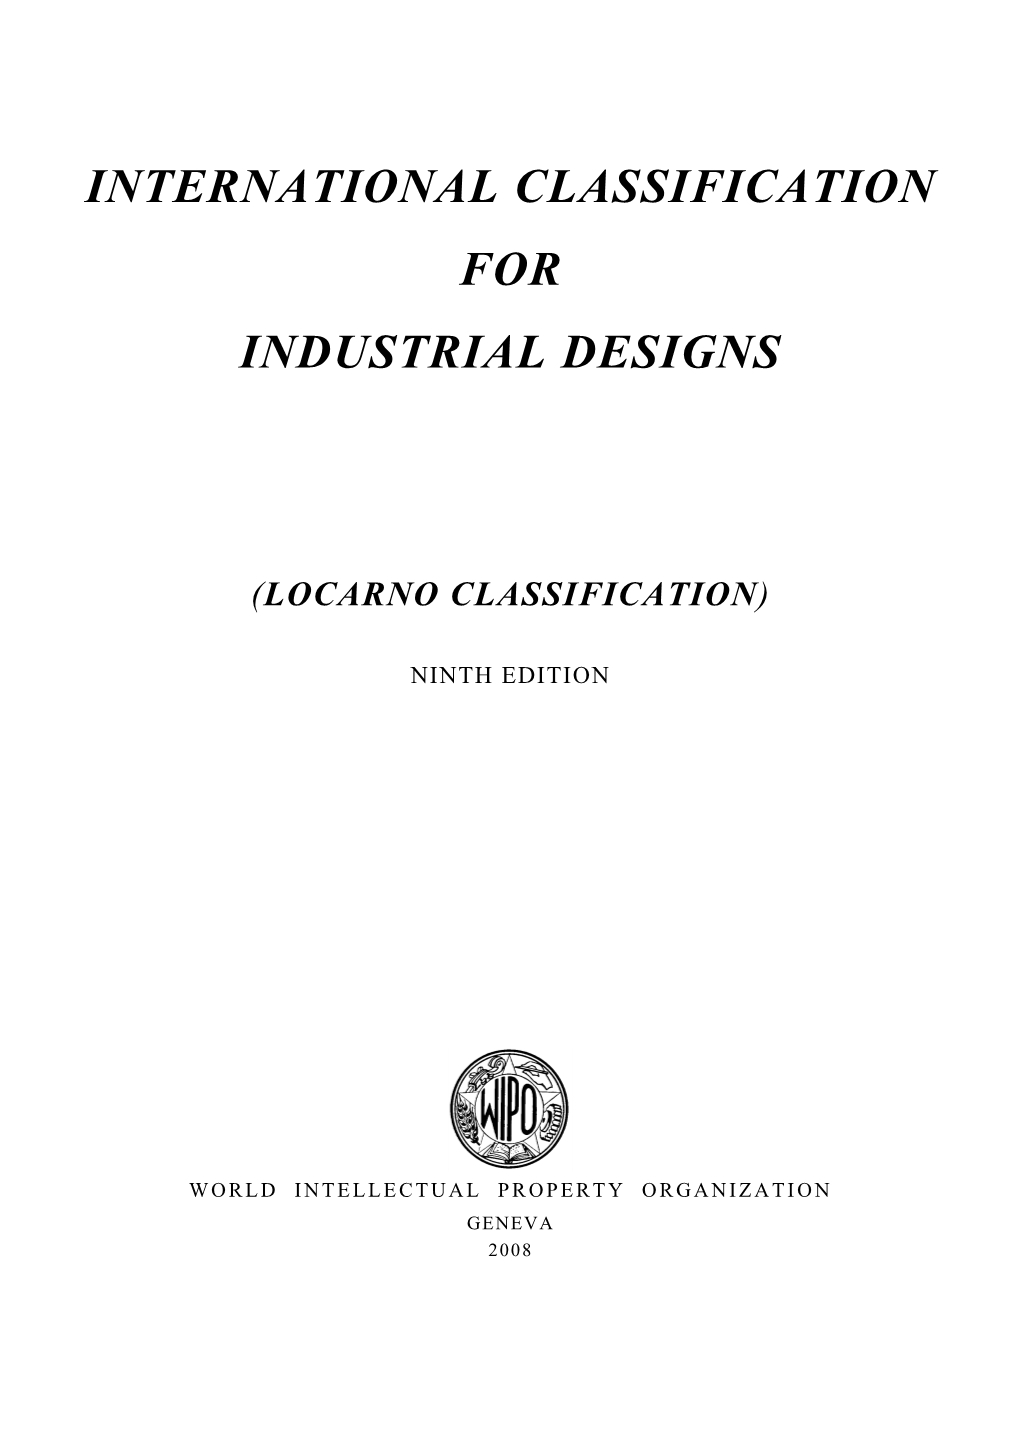 International Classification for Industrial Designs